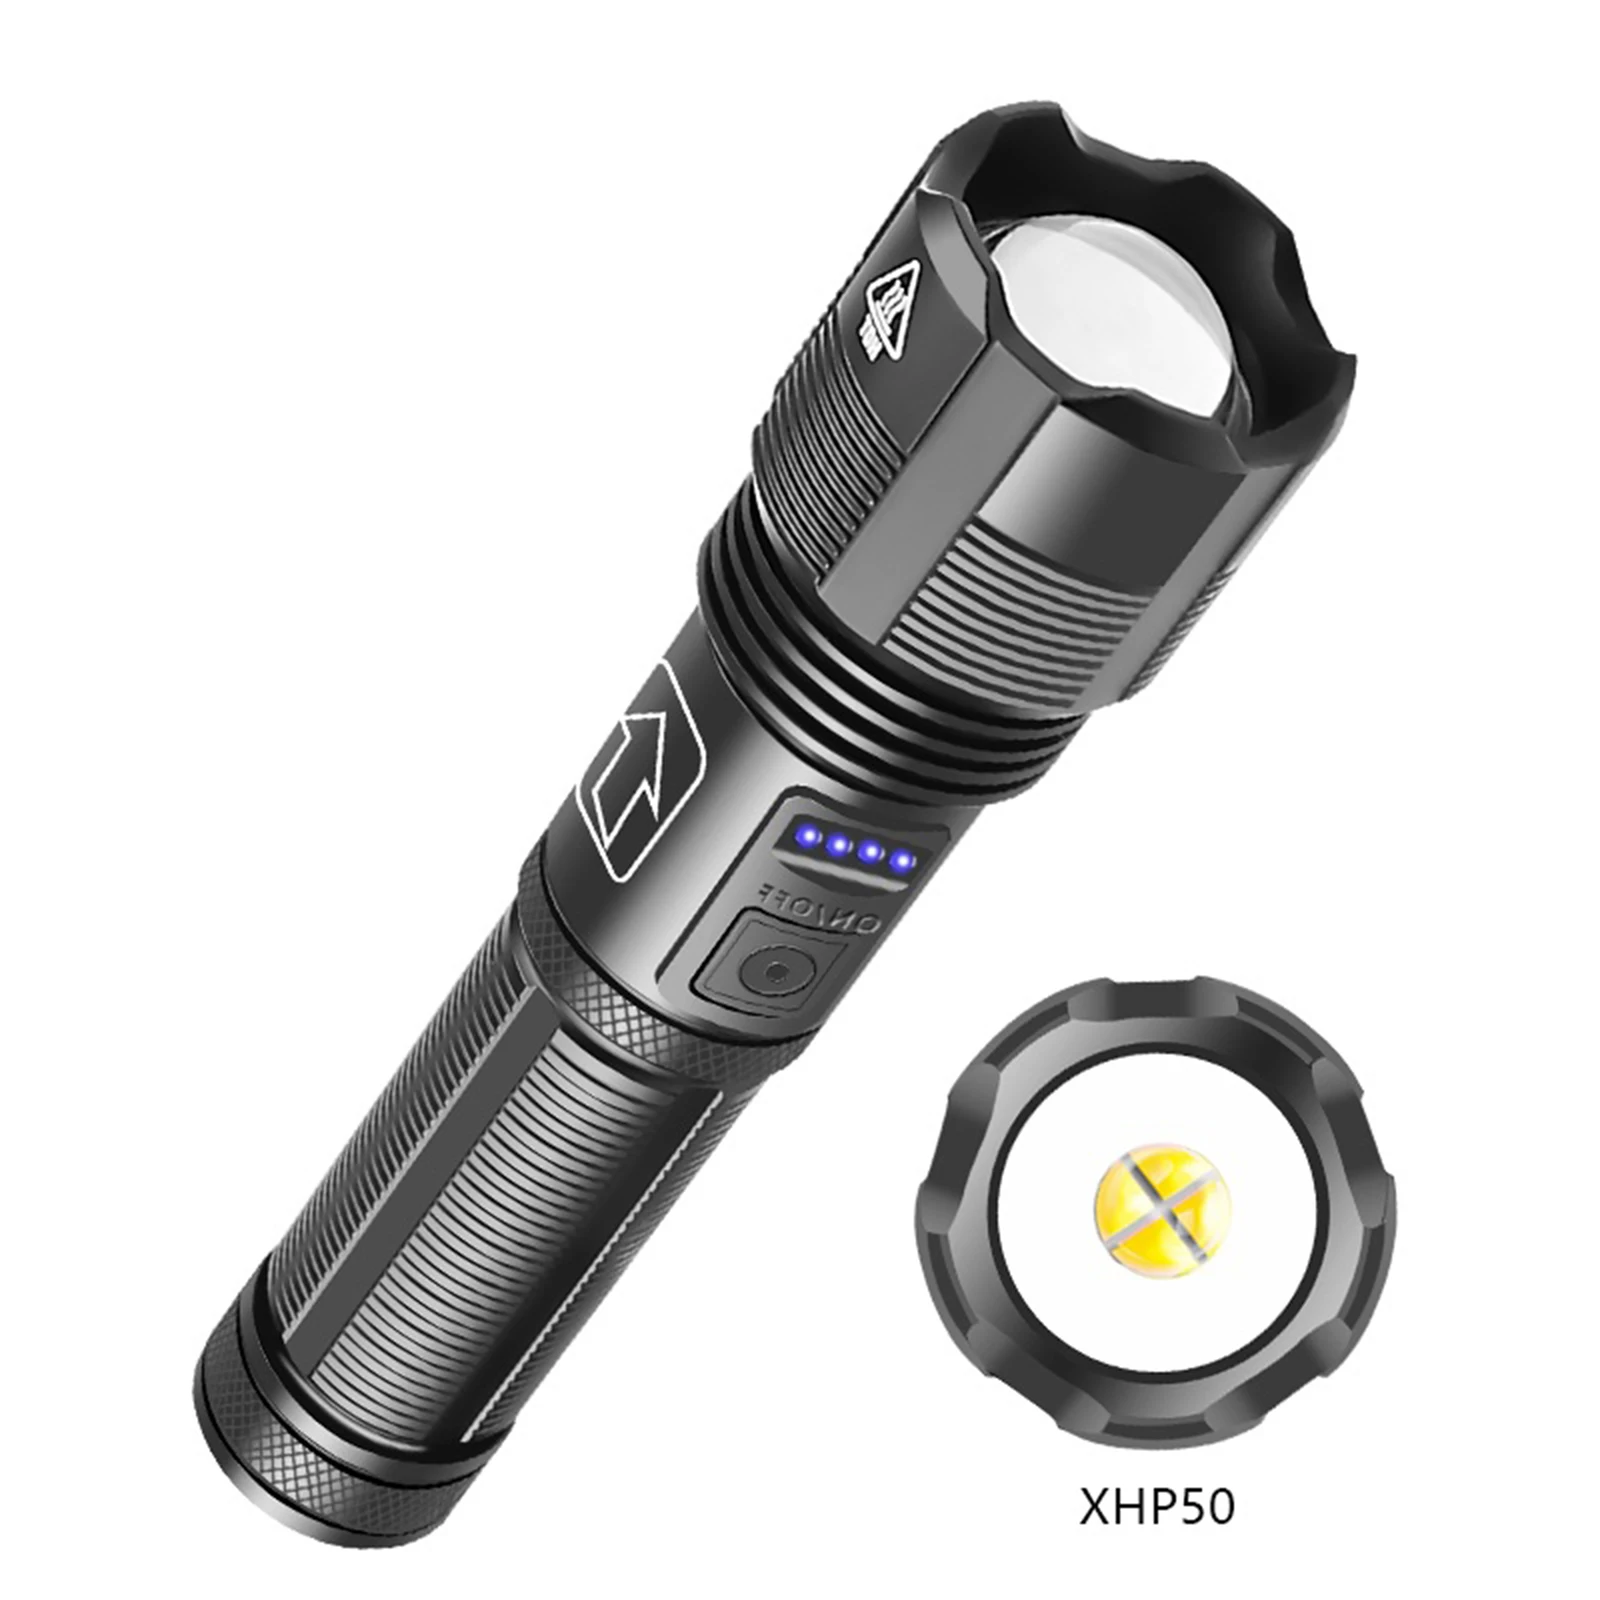 

XHP50 Flashlight 1500LM Rechargeable Ultra-bright Waterproof LED Tactical Flashlight Handheld Flashlight for Camping Emergency